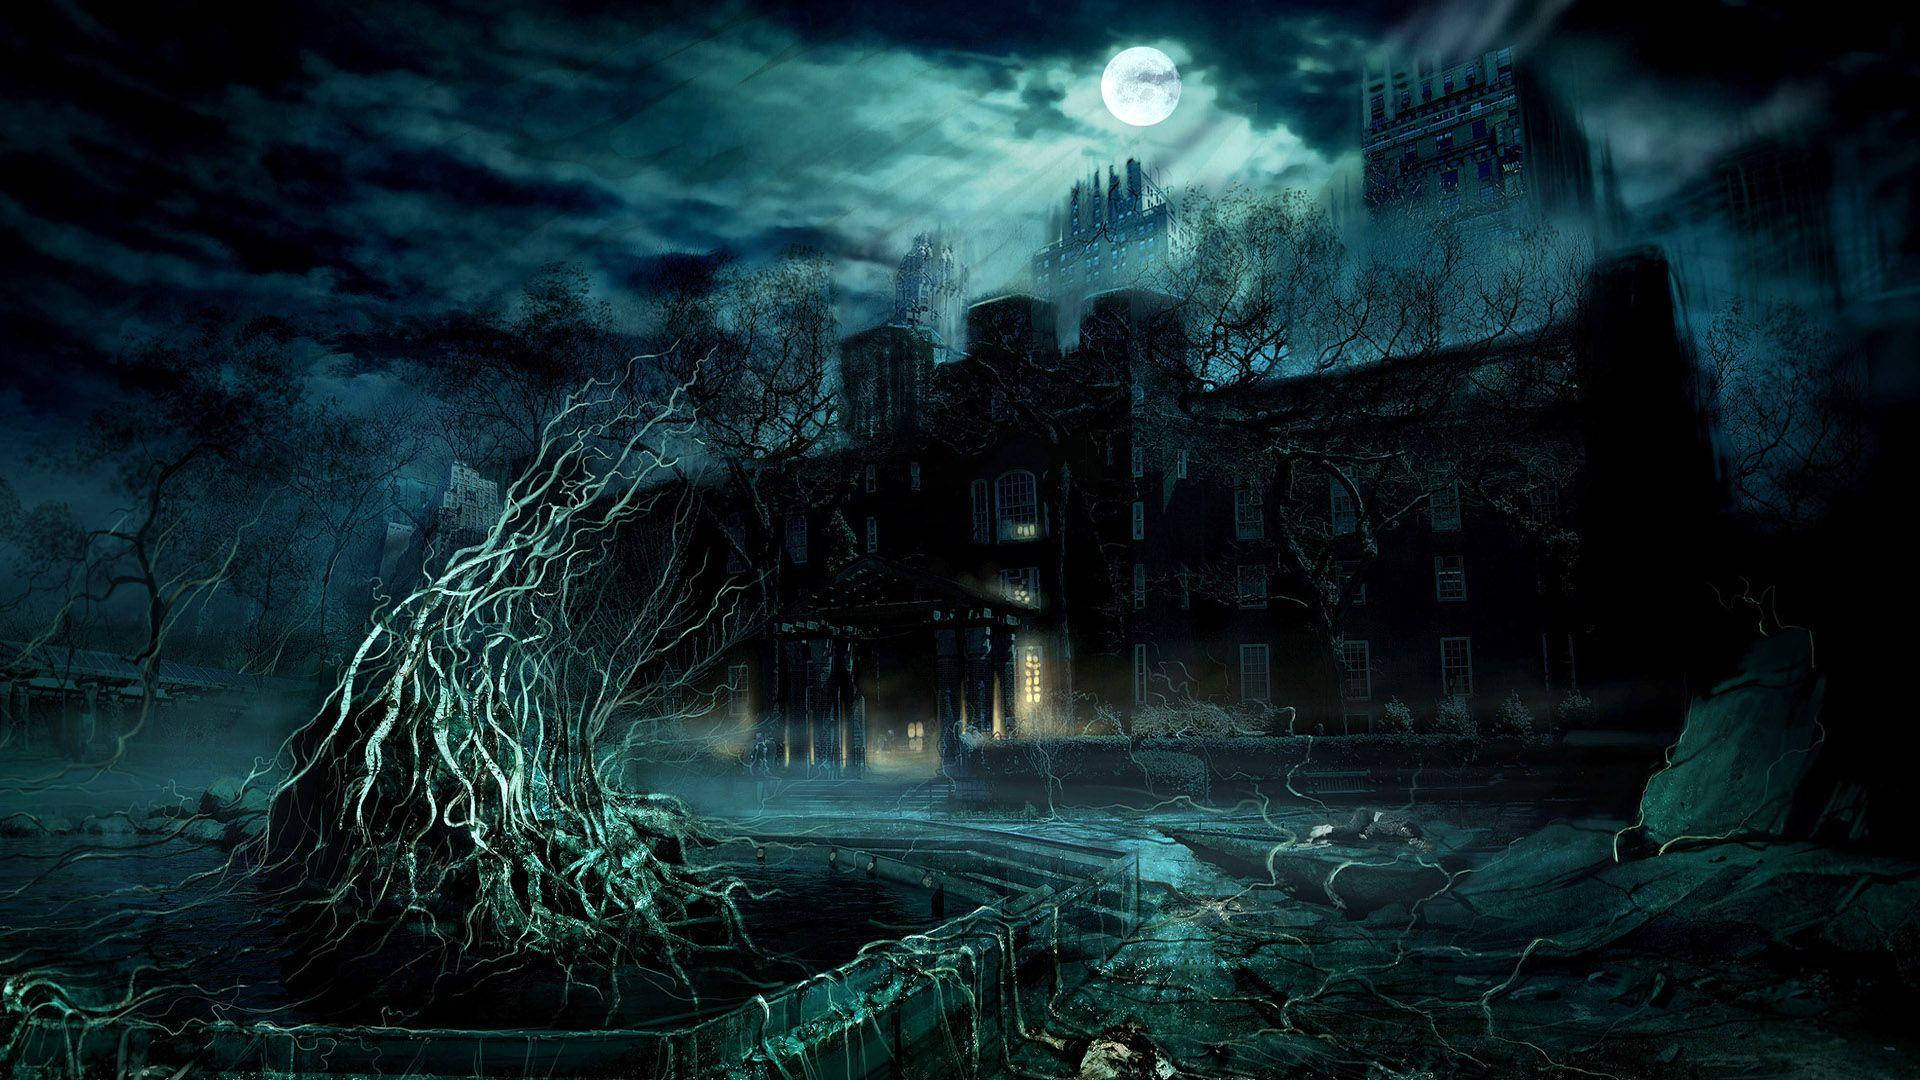 Haunted House With Creepy Trees Wallpaper